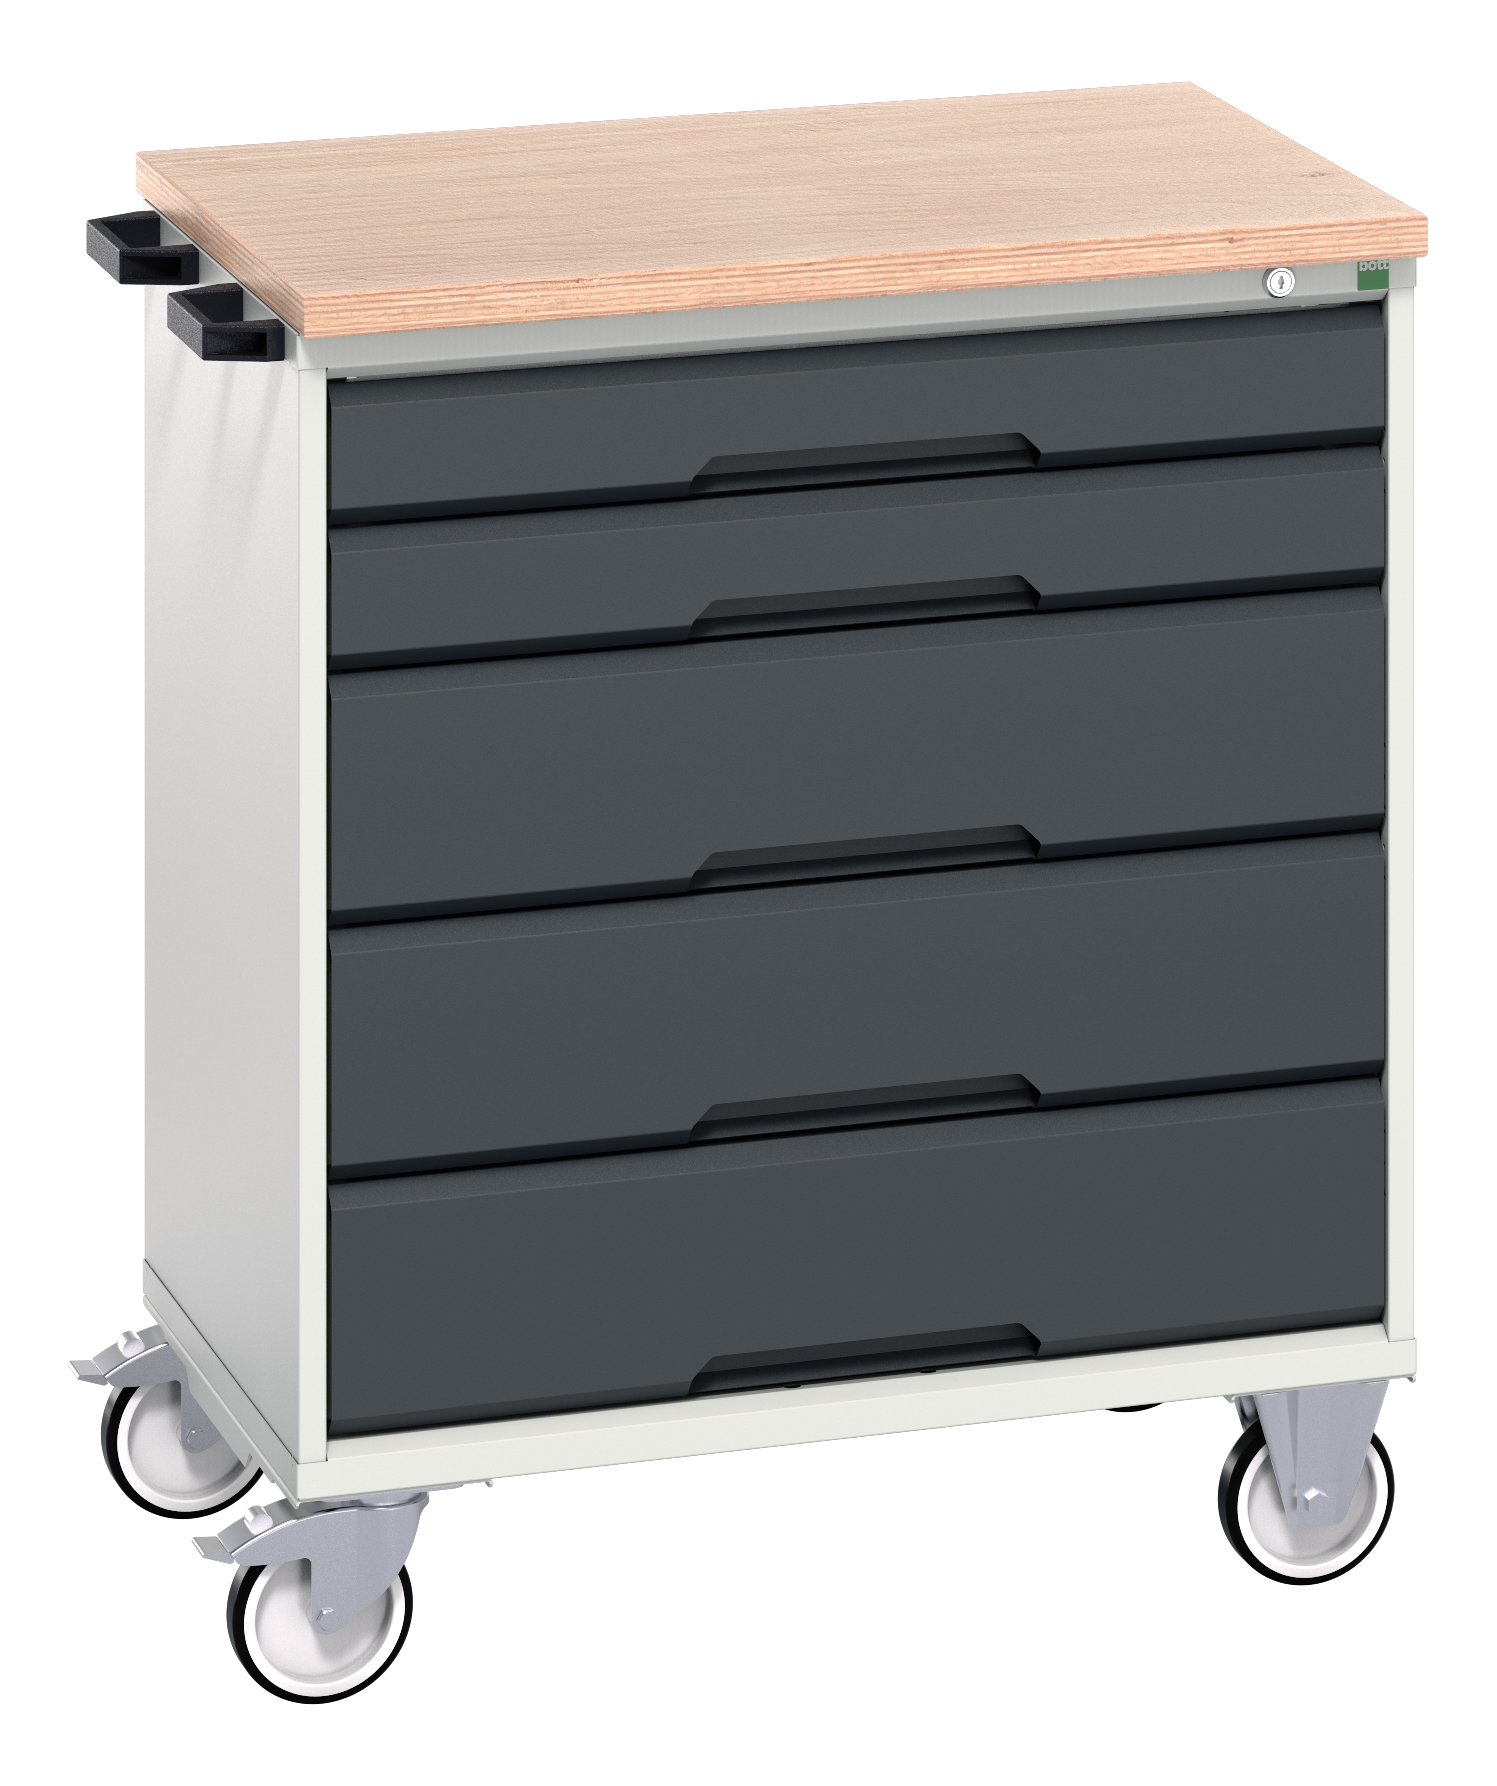 Bott Verso Mobile Drawer Cabinet With 5 Drawers & Multiplex Top - 16927001.19